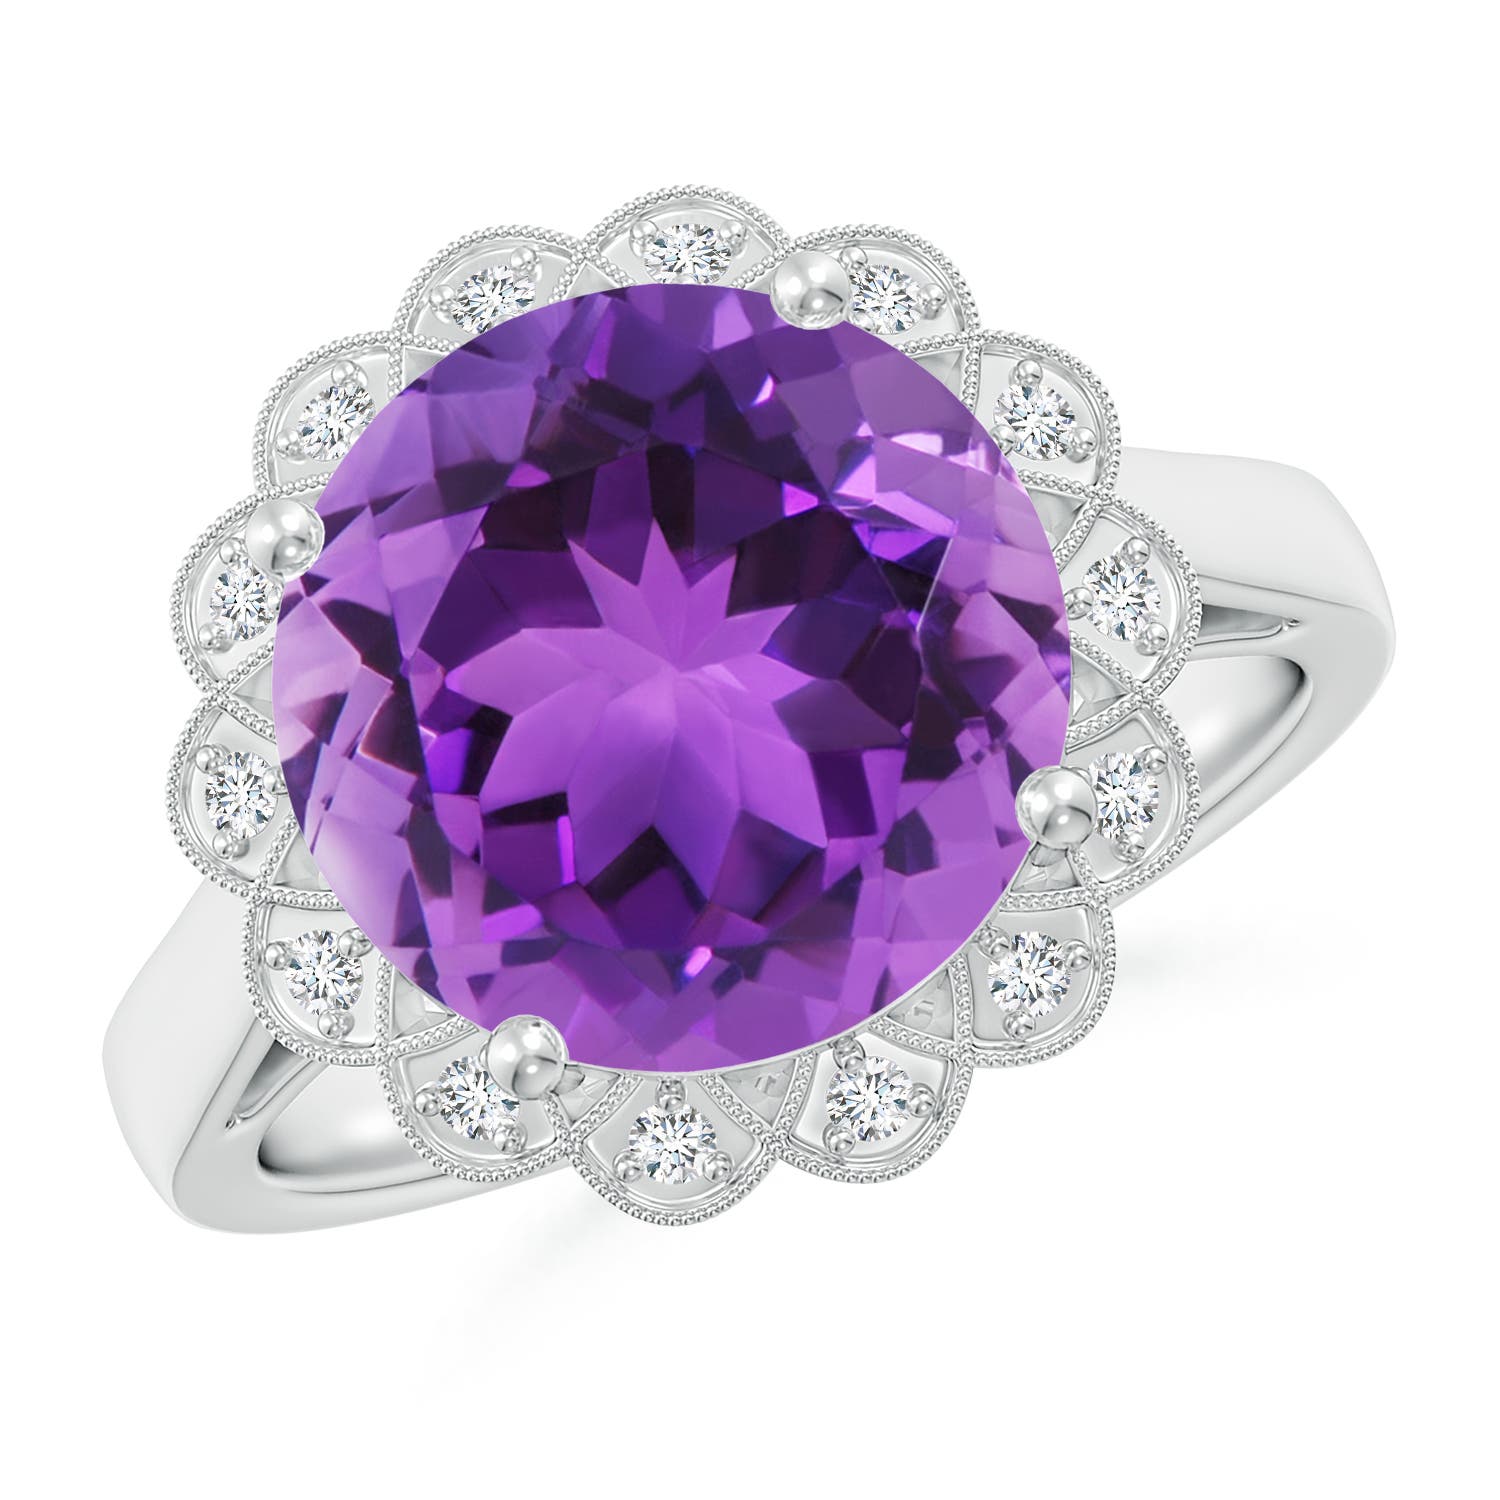 AAA- Amethyst / 4.86 CT / 14 KT White Gold